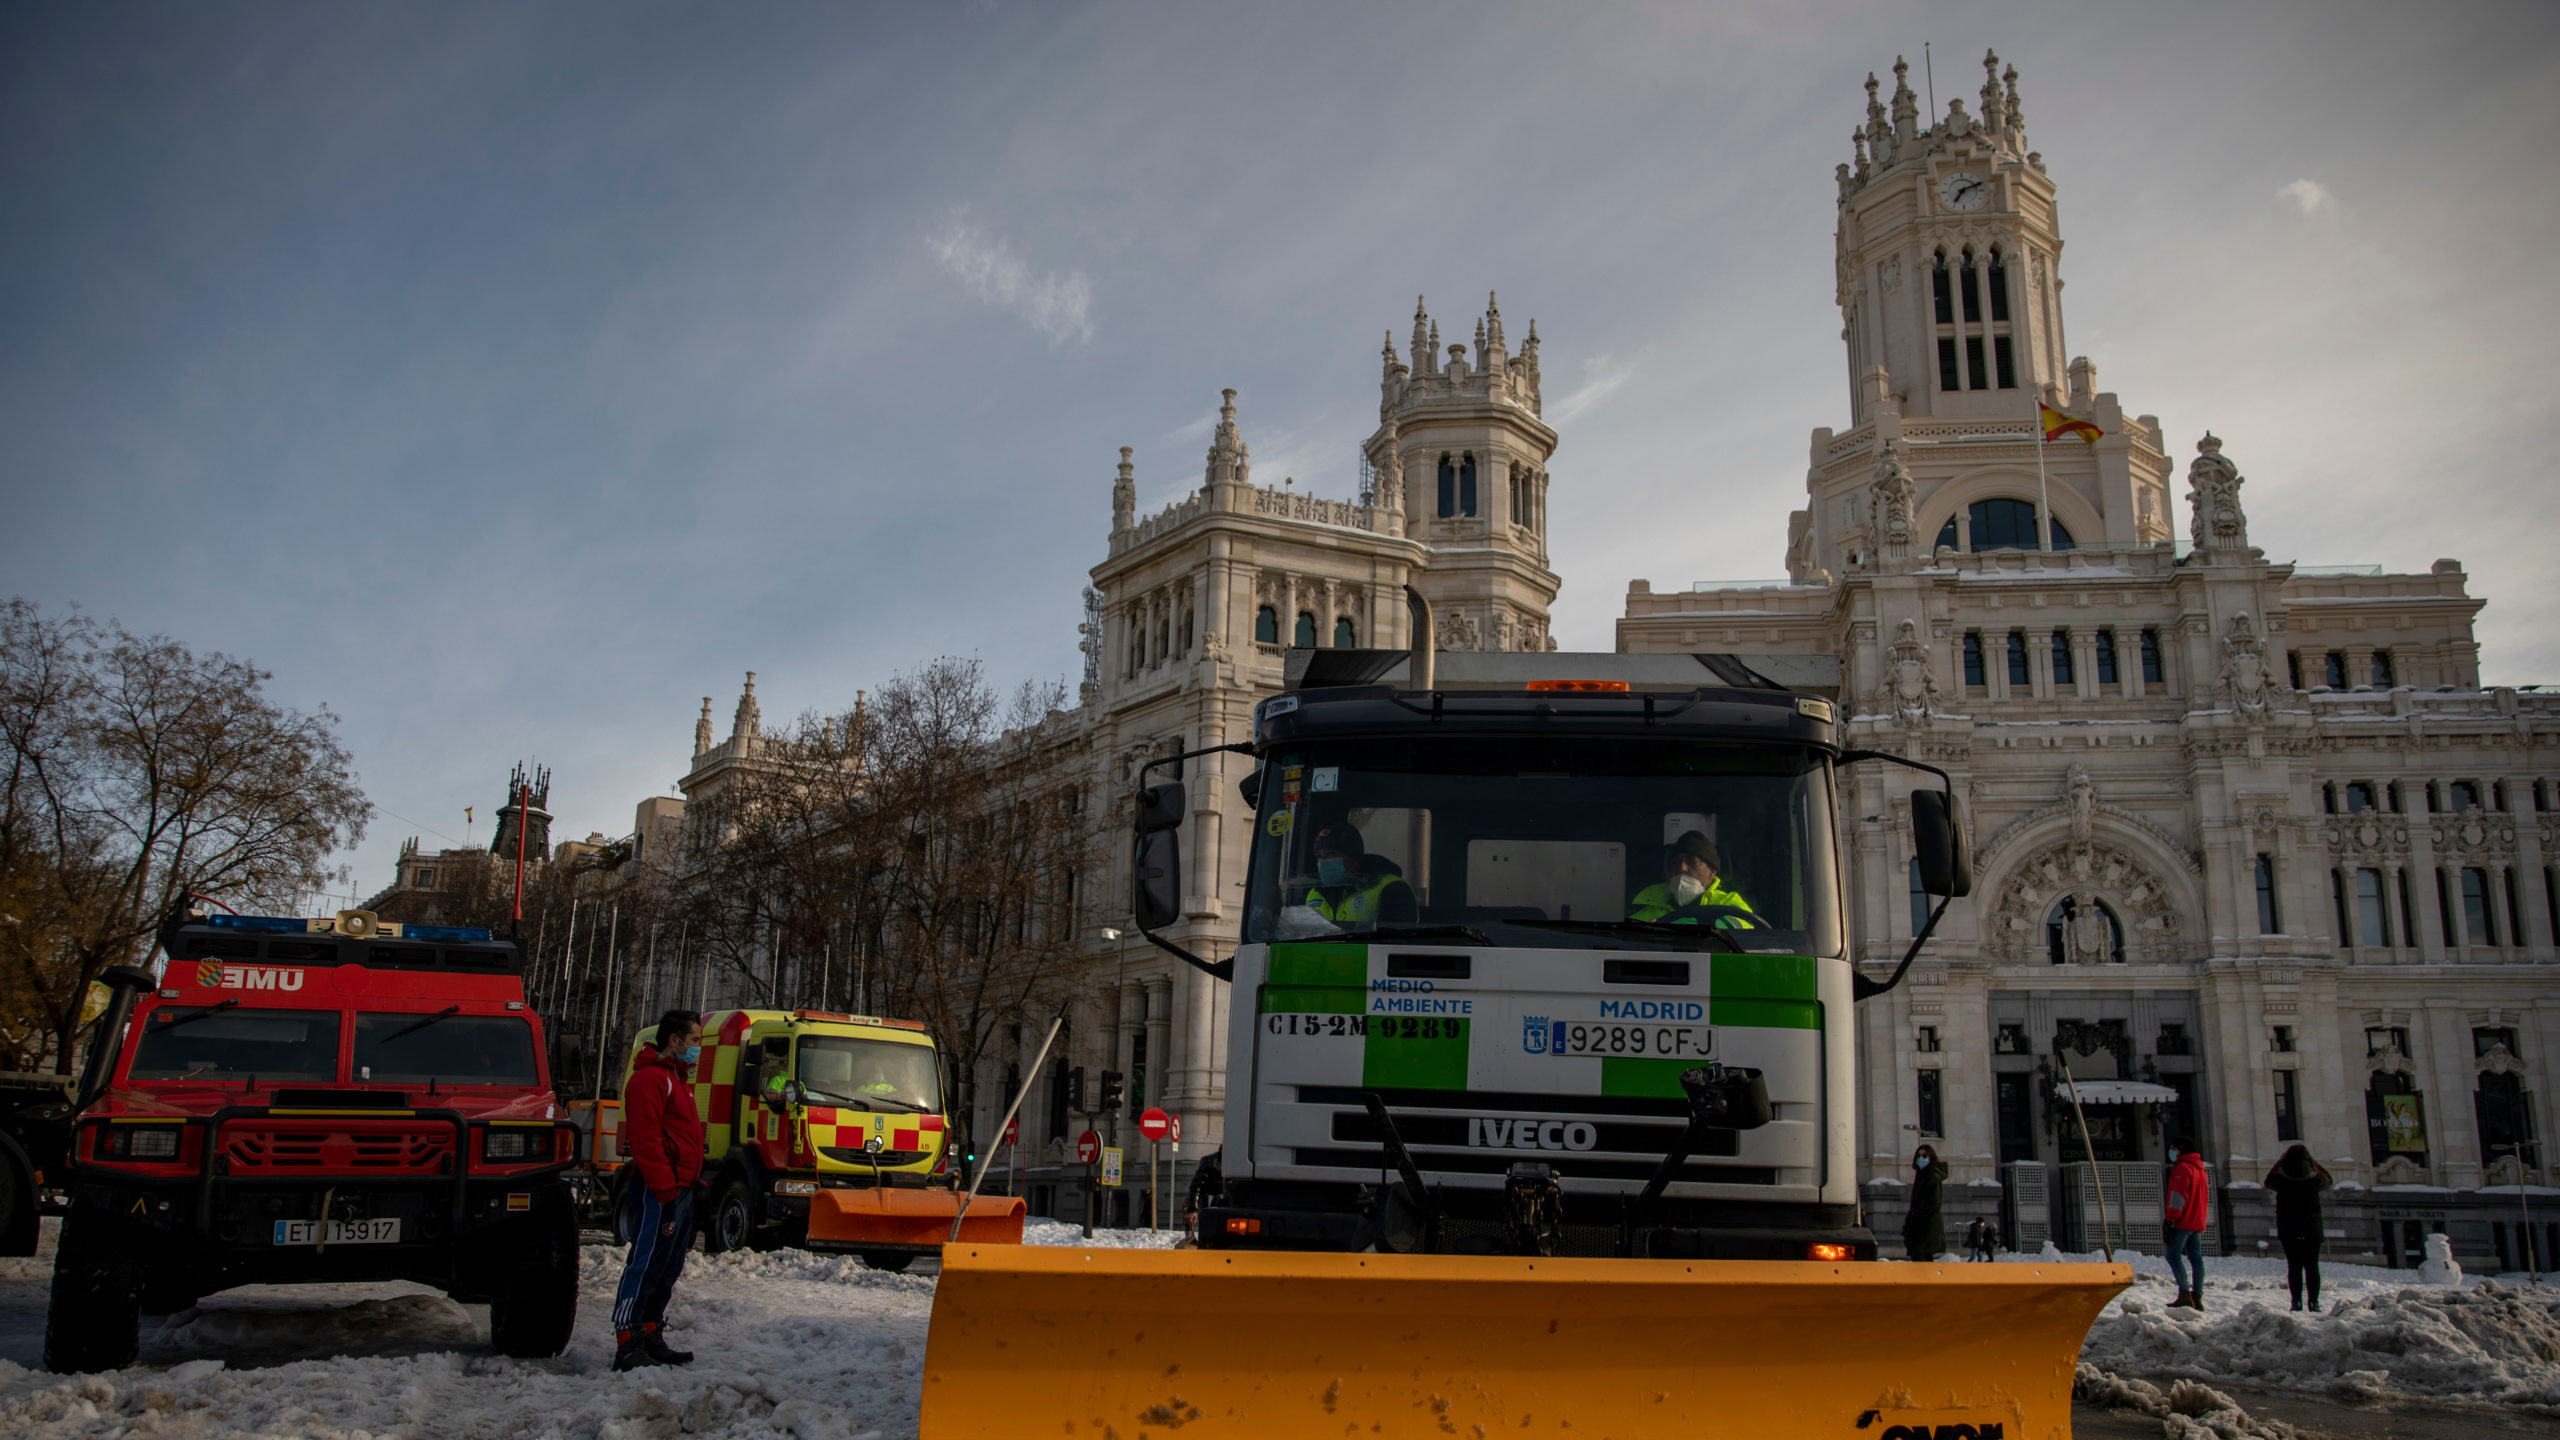 A truck-mounted snowblower works at Plaza de Cibeles a day after the heaviest snowfall in decades on January 10, 2021 in Madrid, Spain.  (Photo: Pablo Blazquez Dominguez, Getty Images)